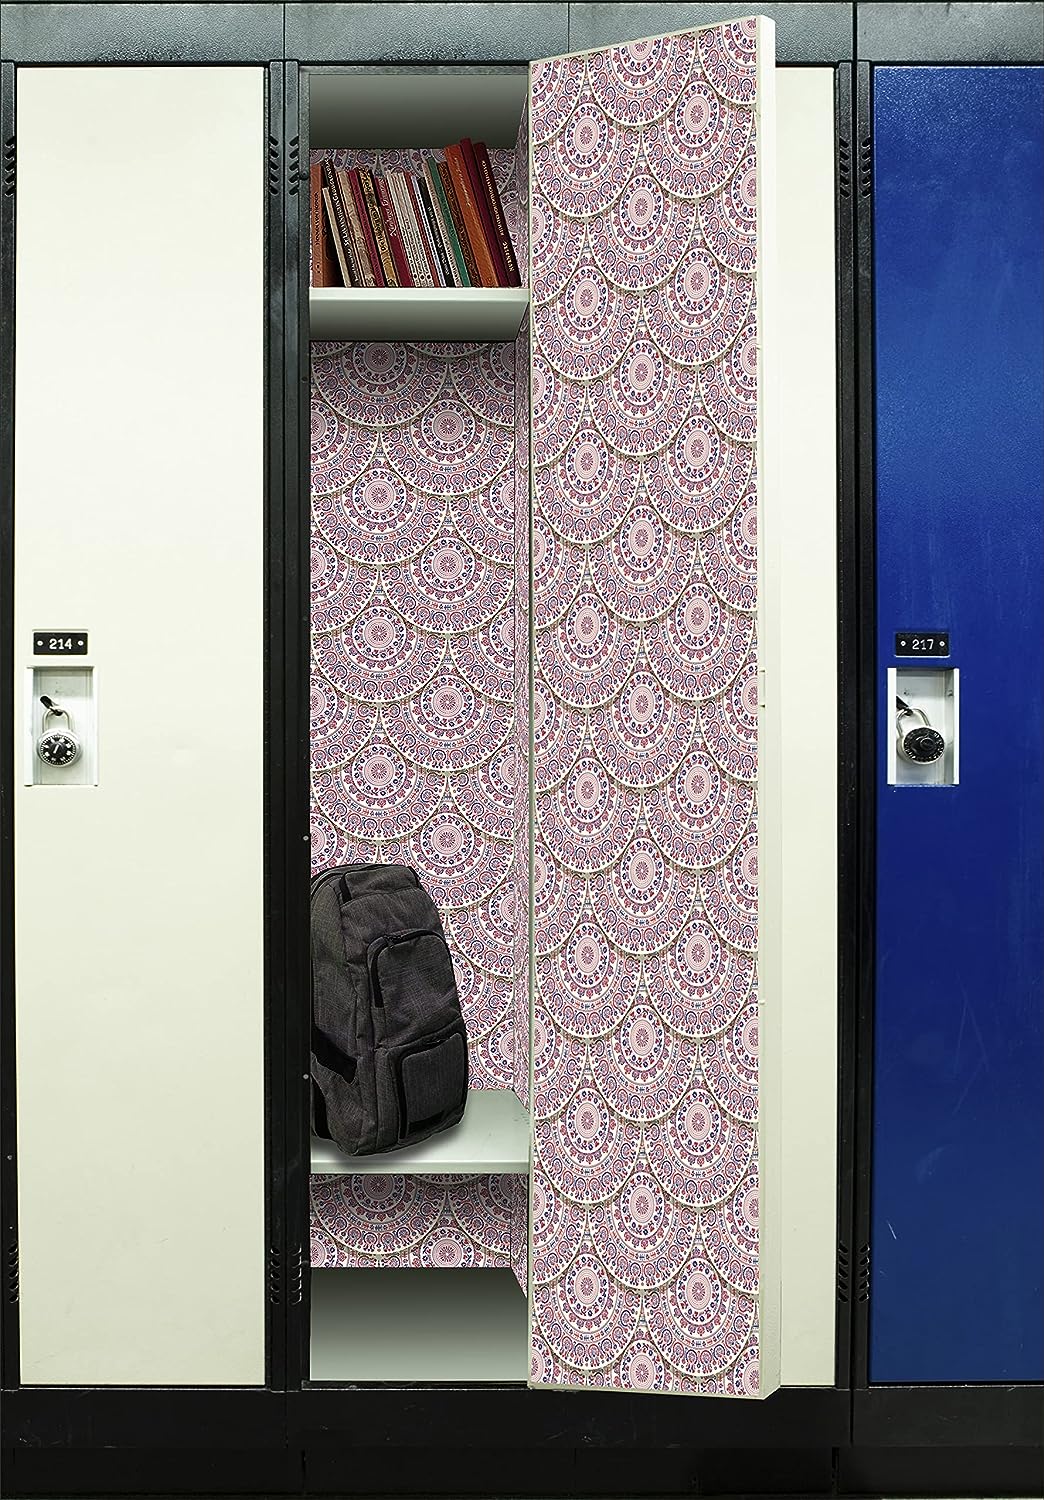 PELICAN INDUSTRIAL Deluxe School Locker Magnetic Wallpaper (Full Sheet Magnetic) - Full Cover Standard Half Lockers - Trimmable, Easy Install, Remove & Reuse - Pack of 12 Sheets - (Native Aztec vr39)